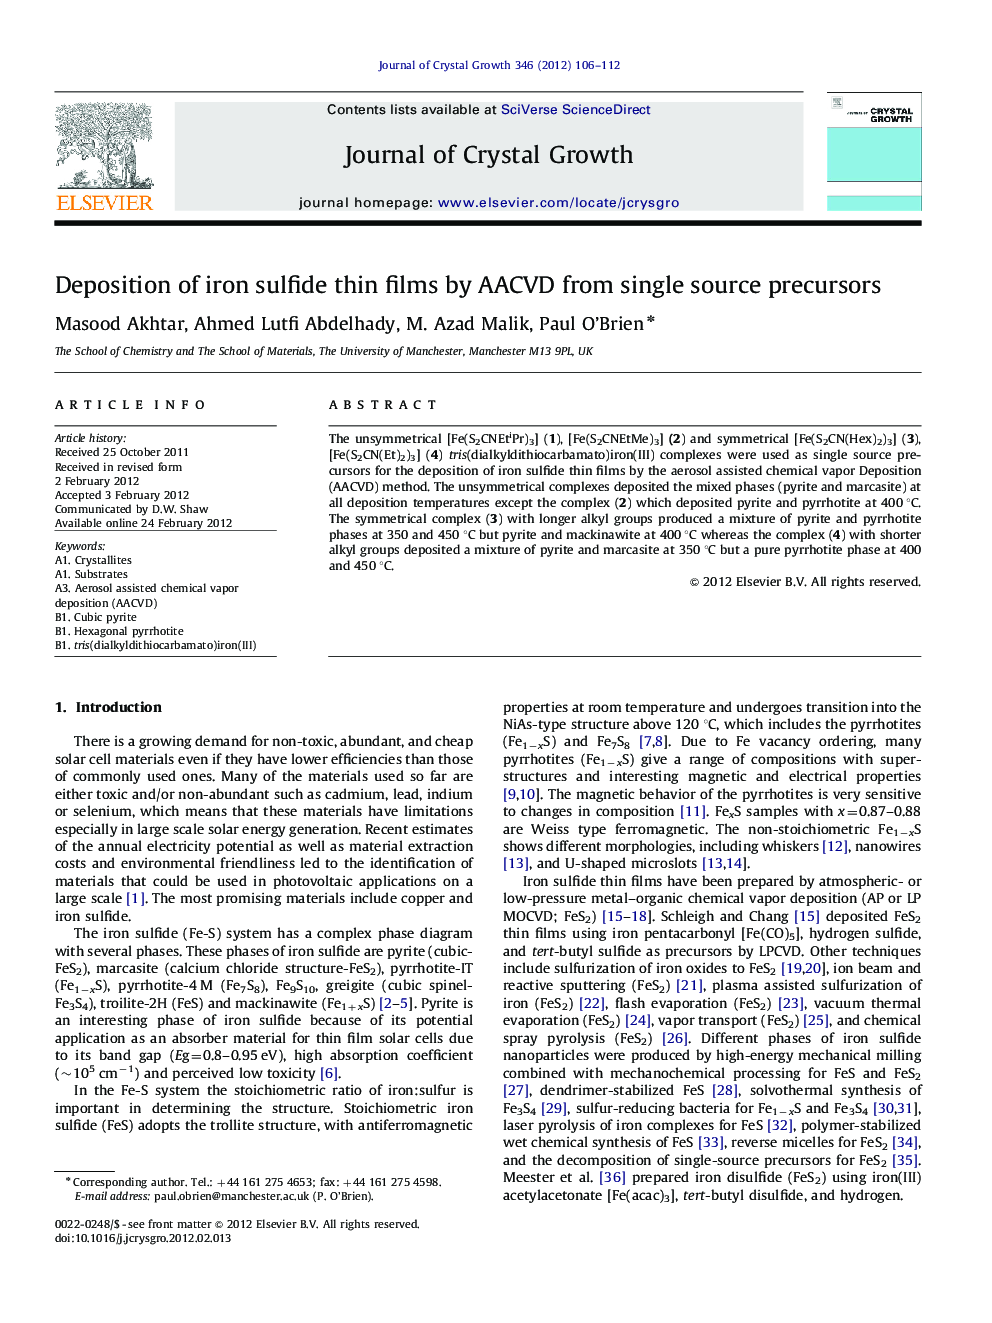 Deposition of iron sulfide thin films by AACVD from single source precursors